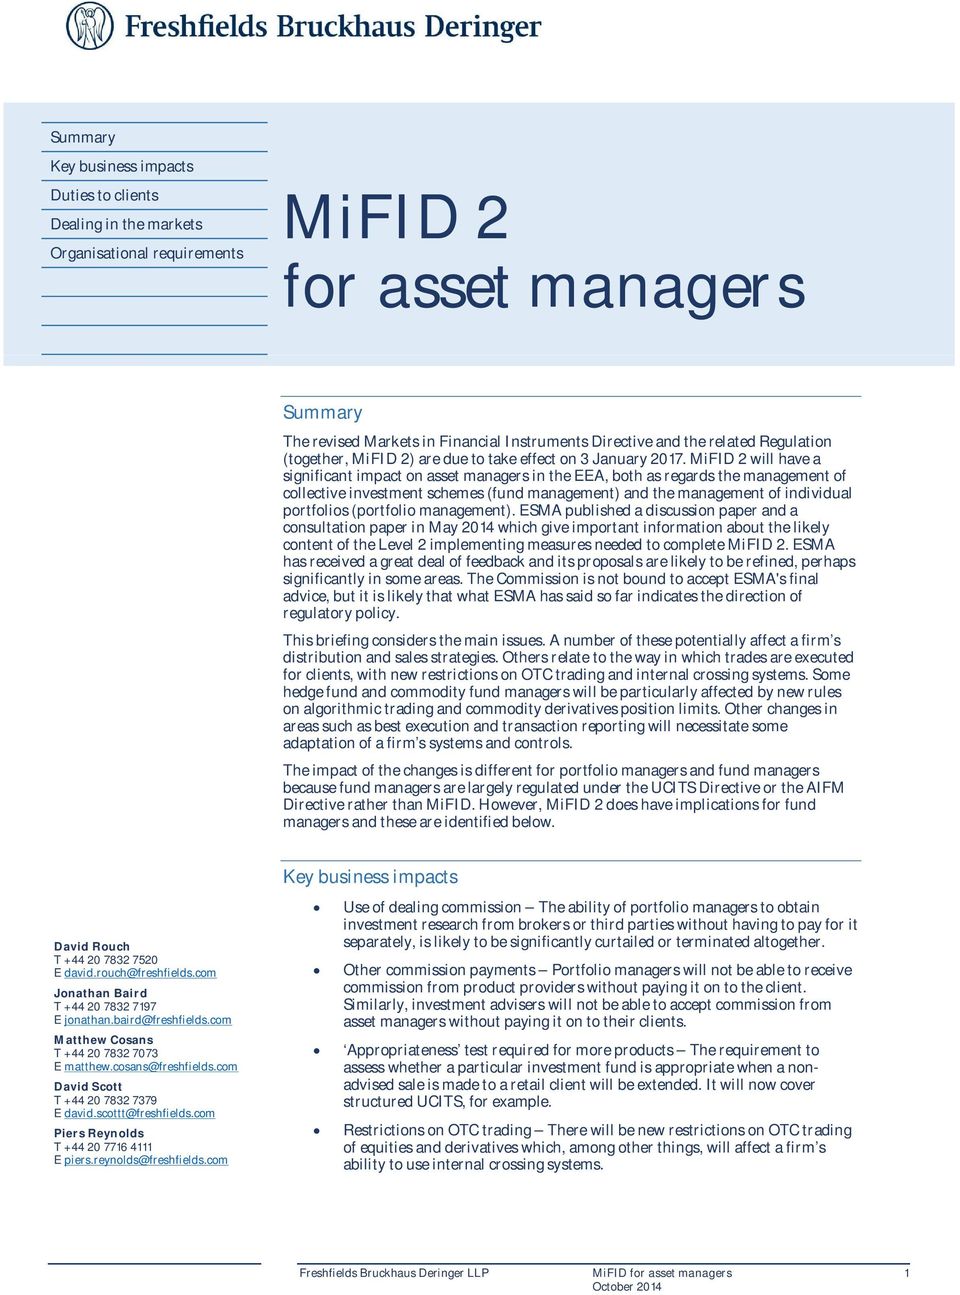 MiFID 2 will have a significant impact on asset managers in the EEA, both as regards the management of collective investment schemes (fund management) and the management of individual portfolios